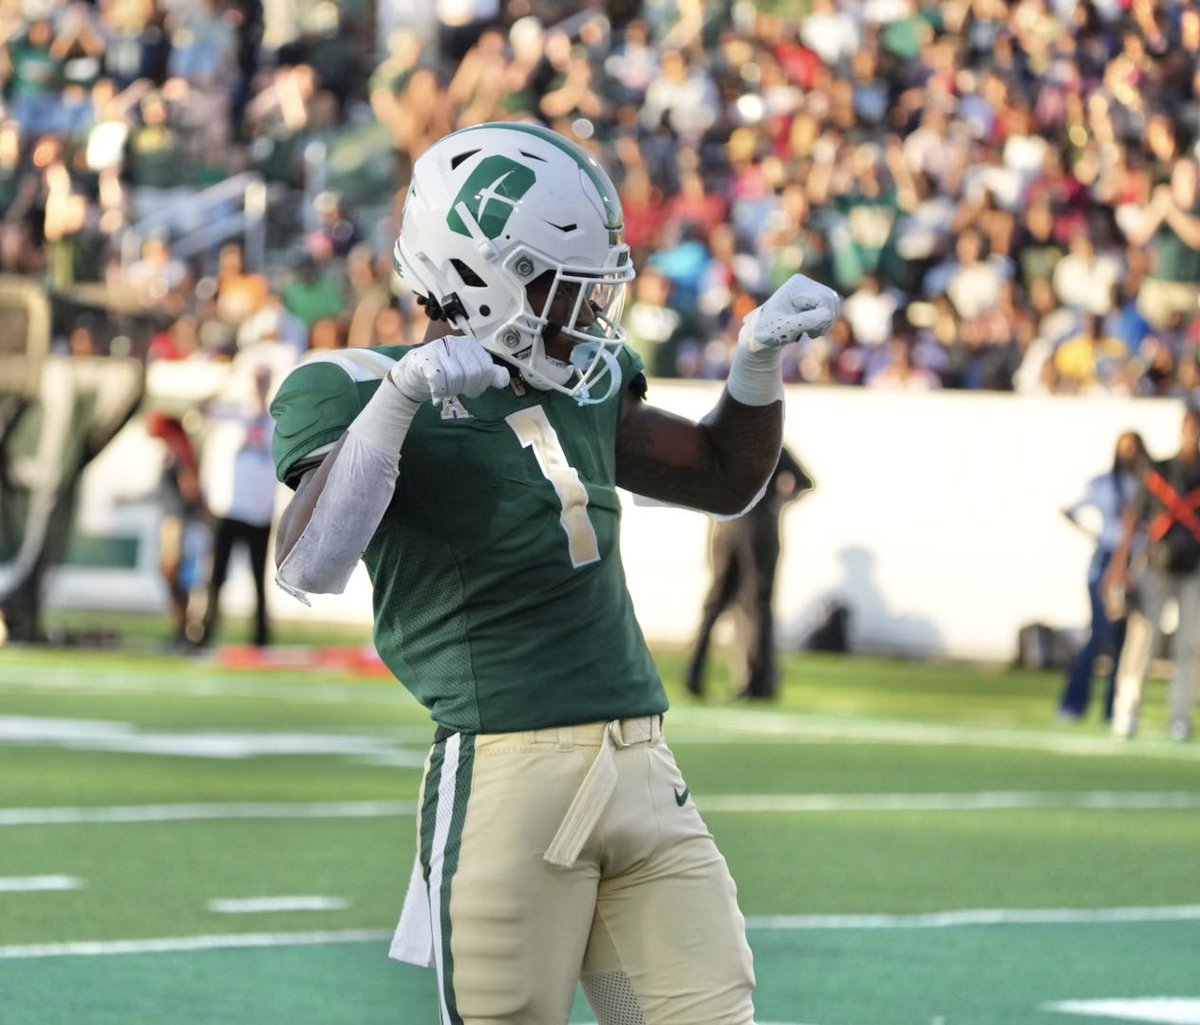 #AGTG Blessed to receive my 11th D1 offer from UNC Charlotte!! @drebly_32 @coachcscott @CoachThourogood @ChrisS0933 @EliHarold_ @OscarSmithFB